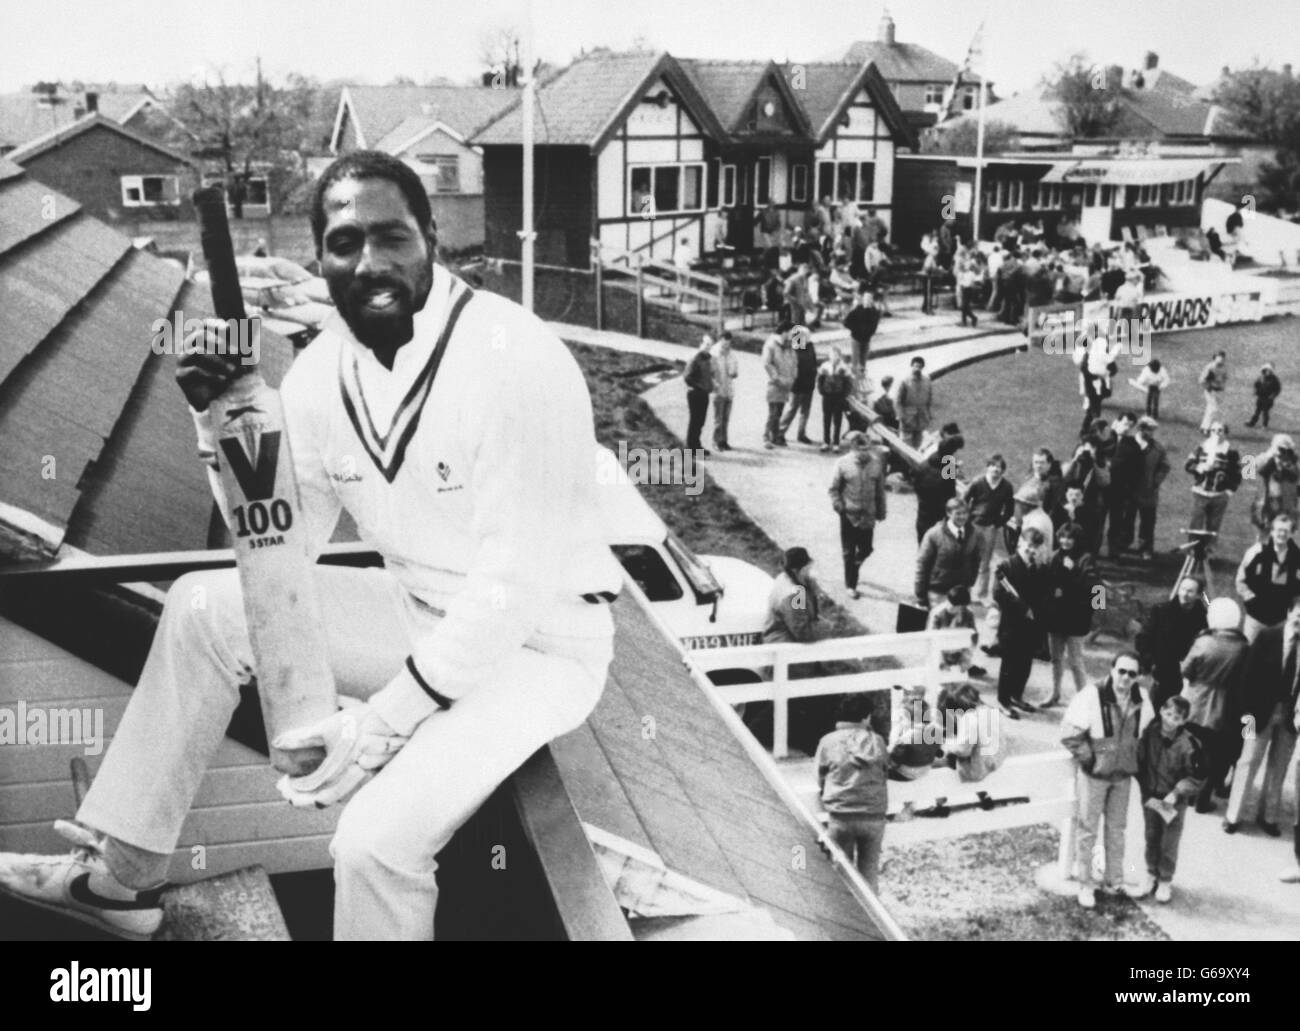 West Indian cricket star Viv Richards on top of the stand at the Lancashire cricket ground of Rishton. Hailed as the greatest batsman in the world, the 35-year-old superstar made an impressive start to the season after making a dramatic dash from his native Antigua, before being caught for 88 by a Haslingden fielder. Stock Photo